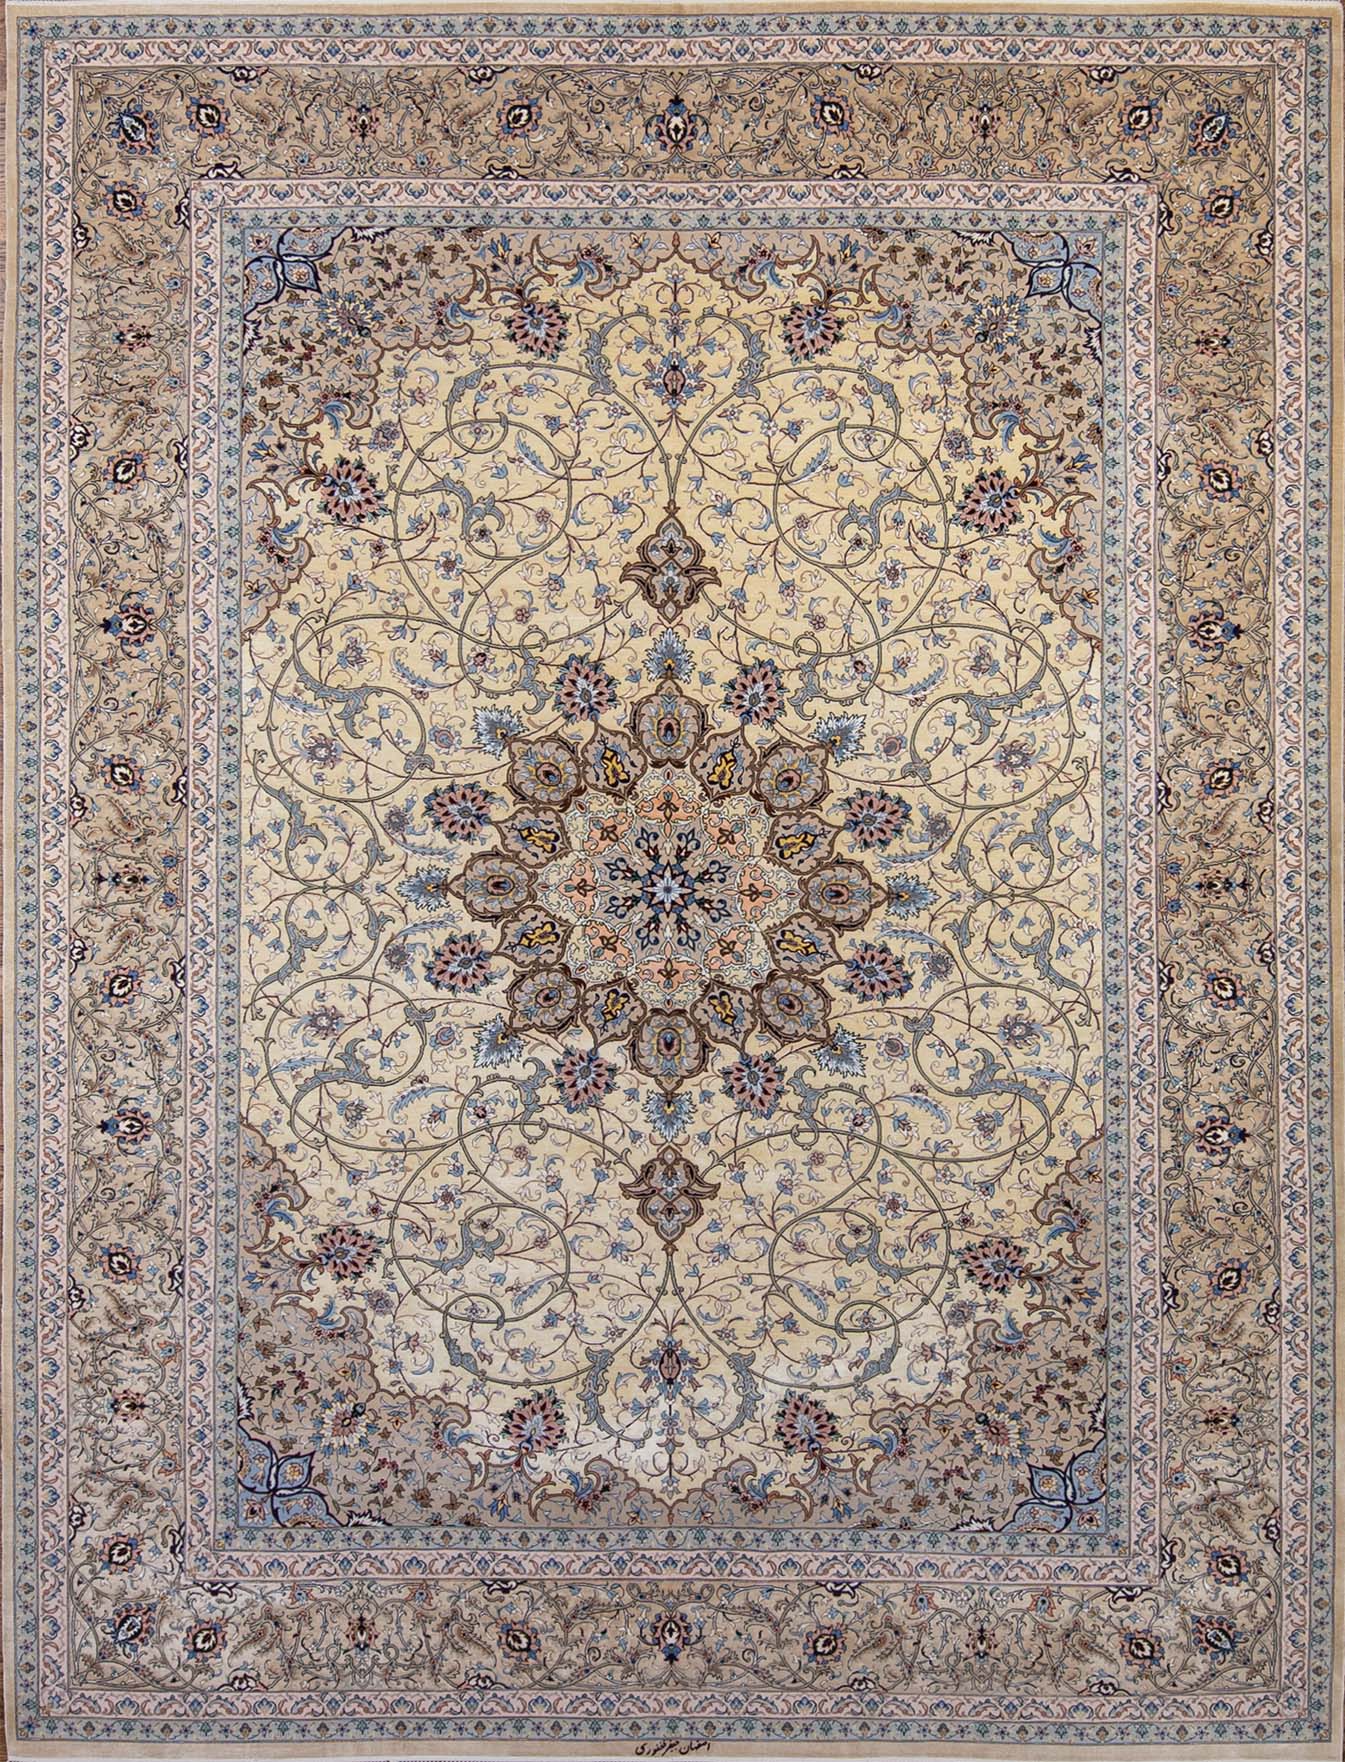 Persian Isfahan silk rug with gold and taupe colors. Size 8.6x12.2